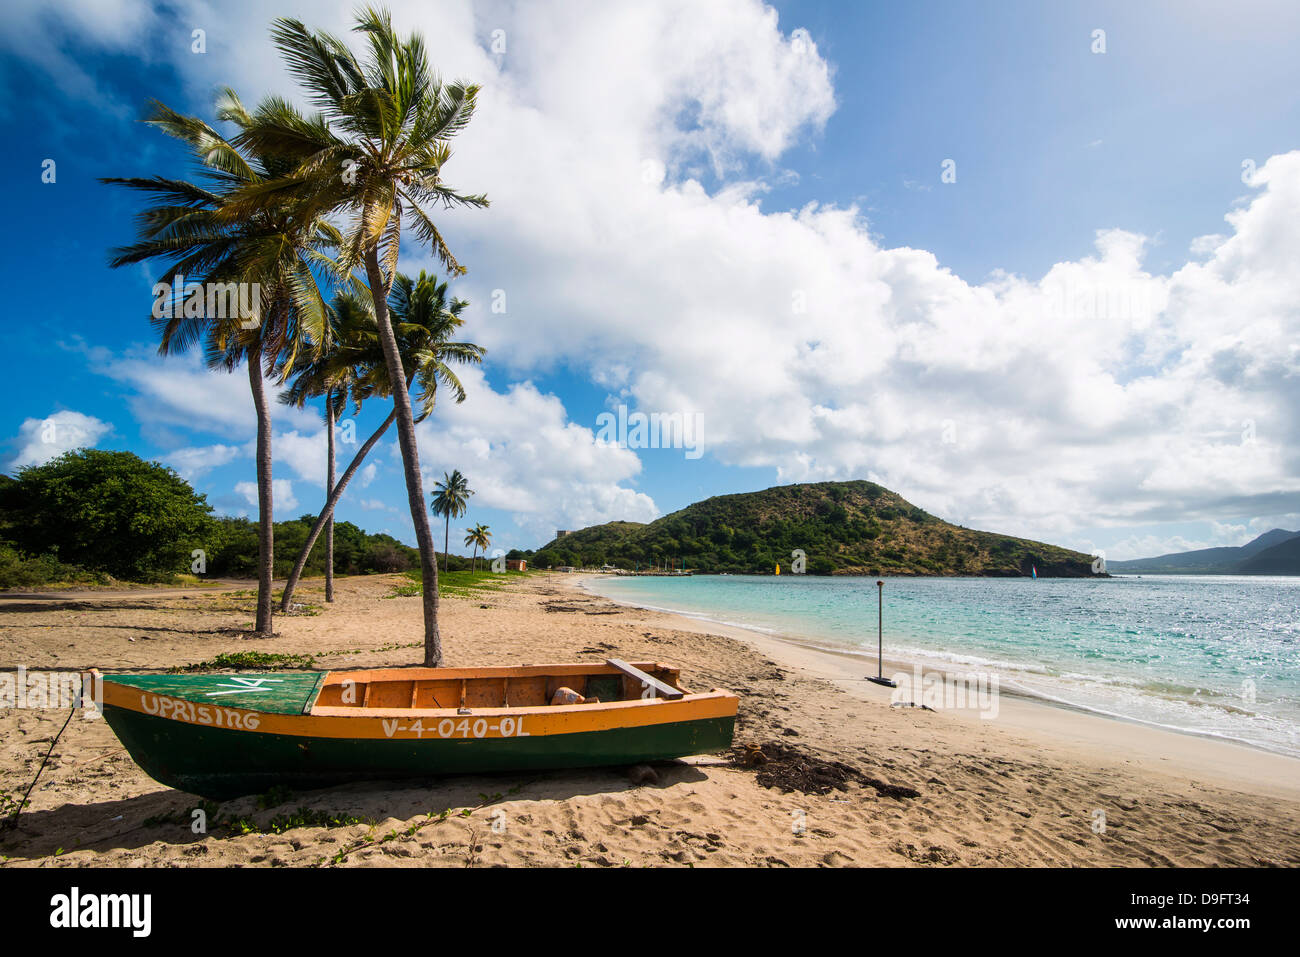 Cockleshell Bay, St. Kitts, St. Kitts and Nevis, Leeward Islands, West Indies, Caribbean Stock Photo